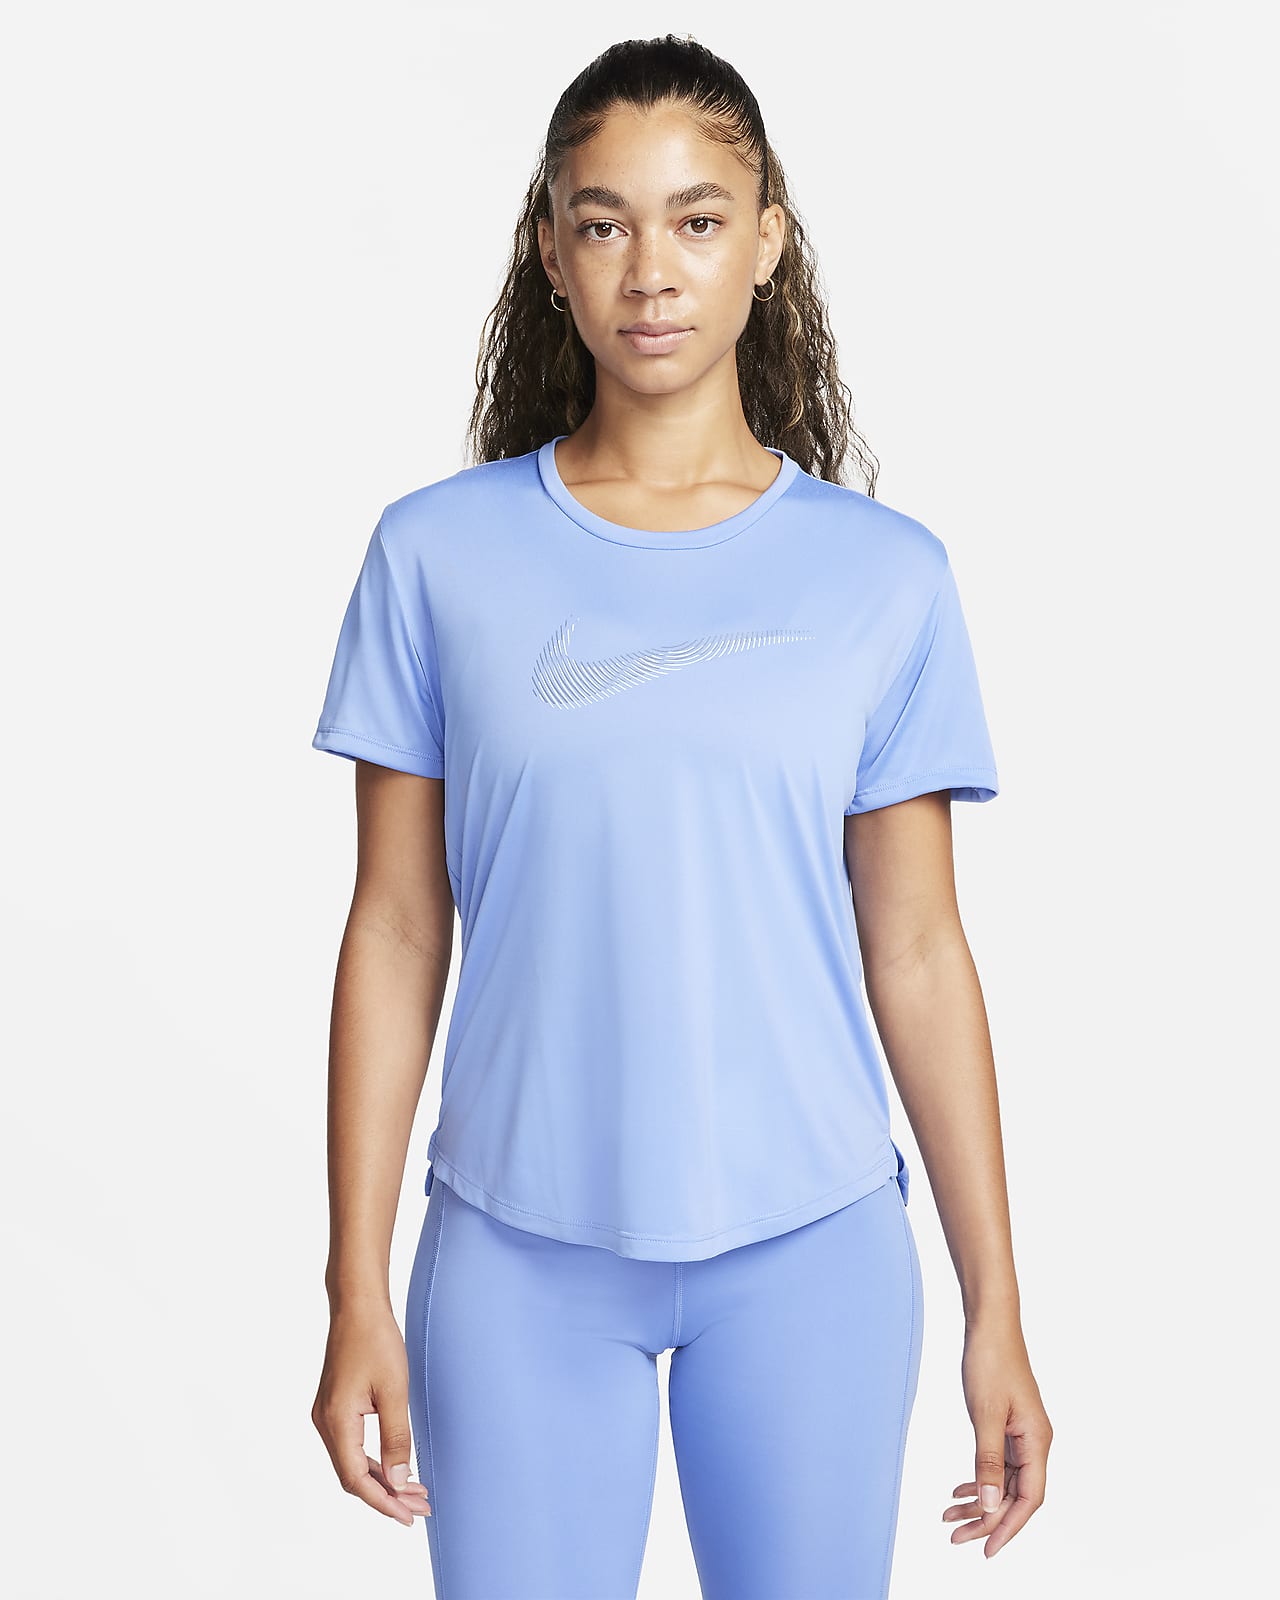 Nike Announces New 'Swoosh Fly' Apparel Line For Women 💧